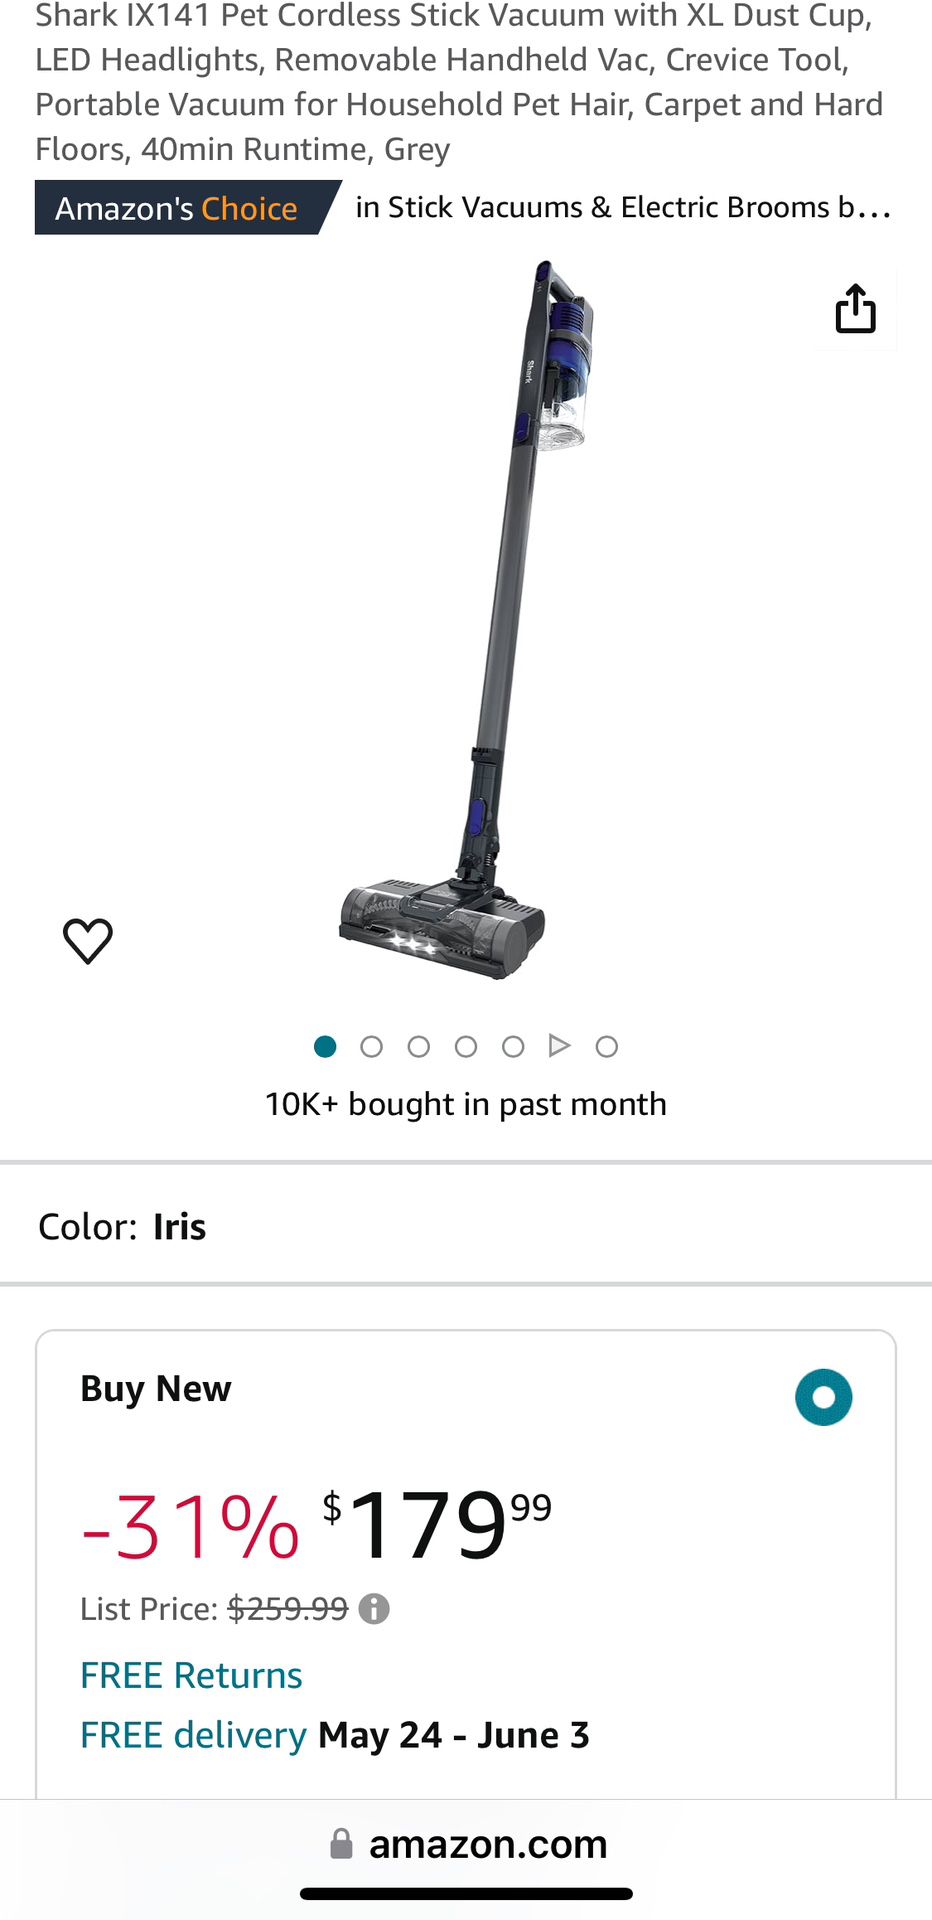 **CHARGING CORD MISSING**  Shark IX141 Pet Cordless Stick Vacuum with XL Dust Cup, LED Headlights, Removable Handheld Vac, Crevice Tool, Portable Vacu